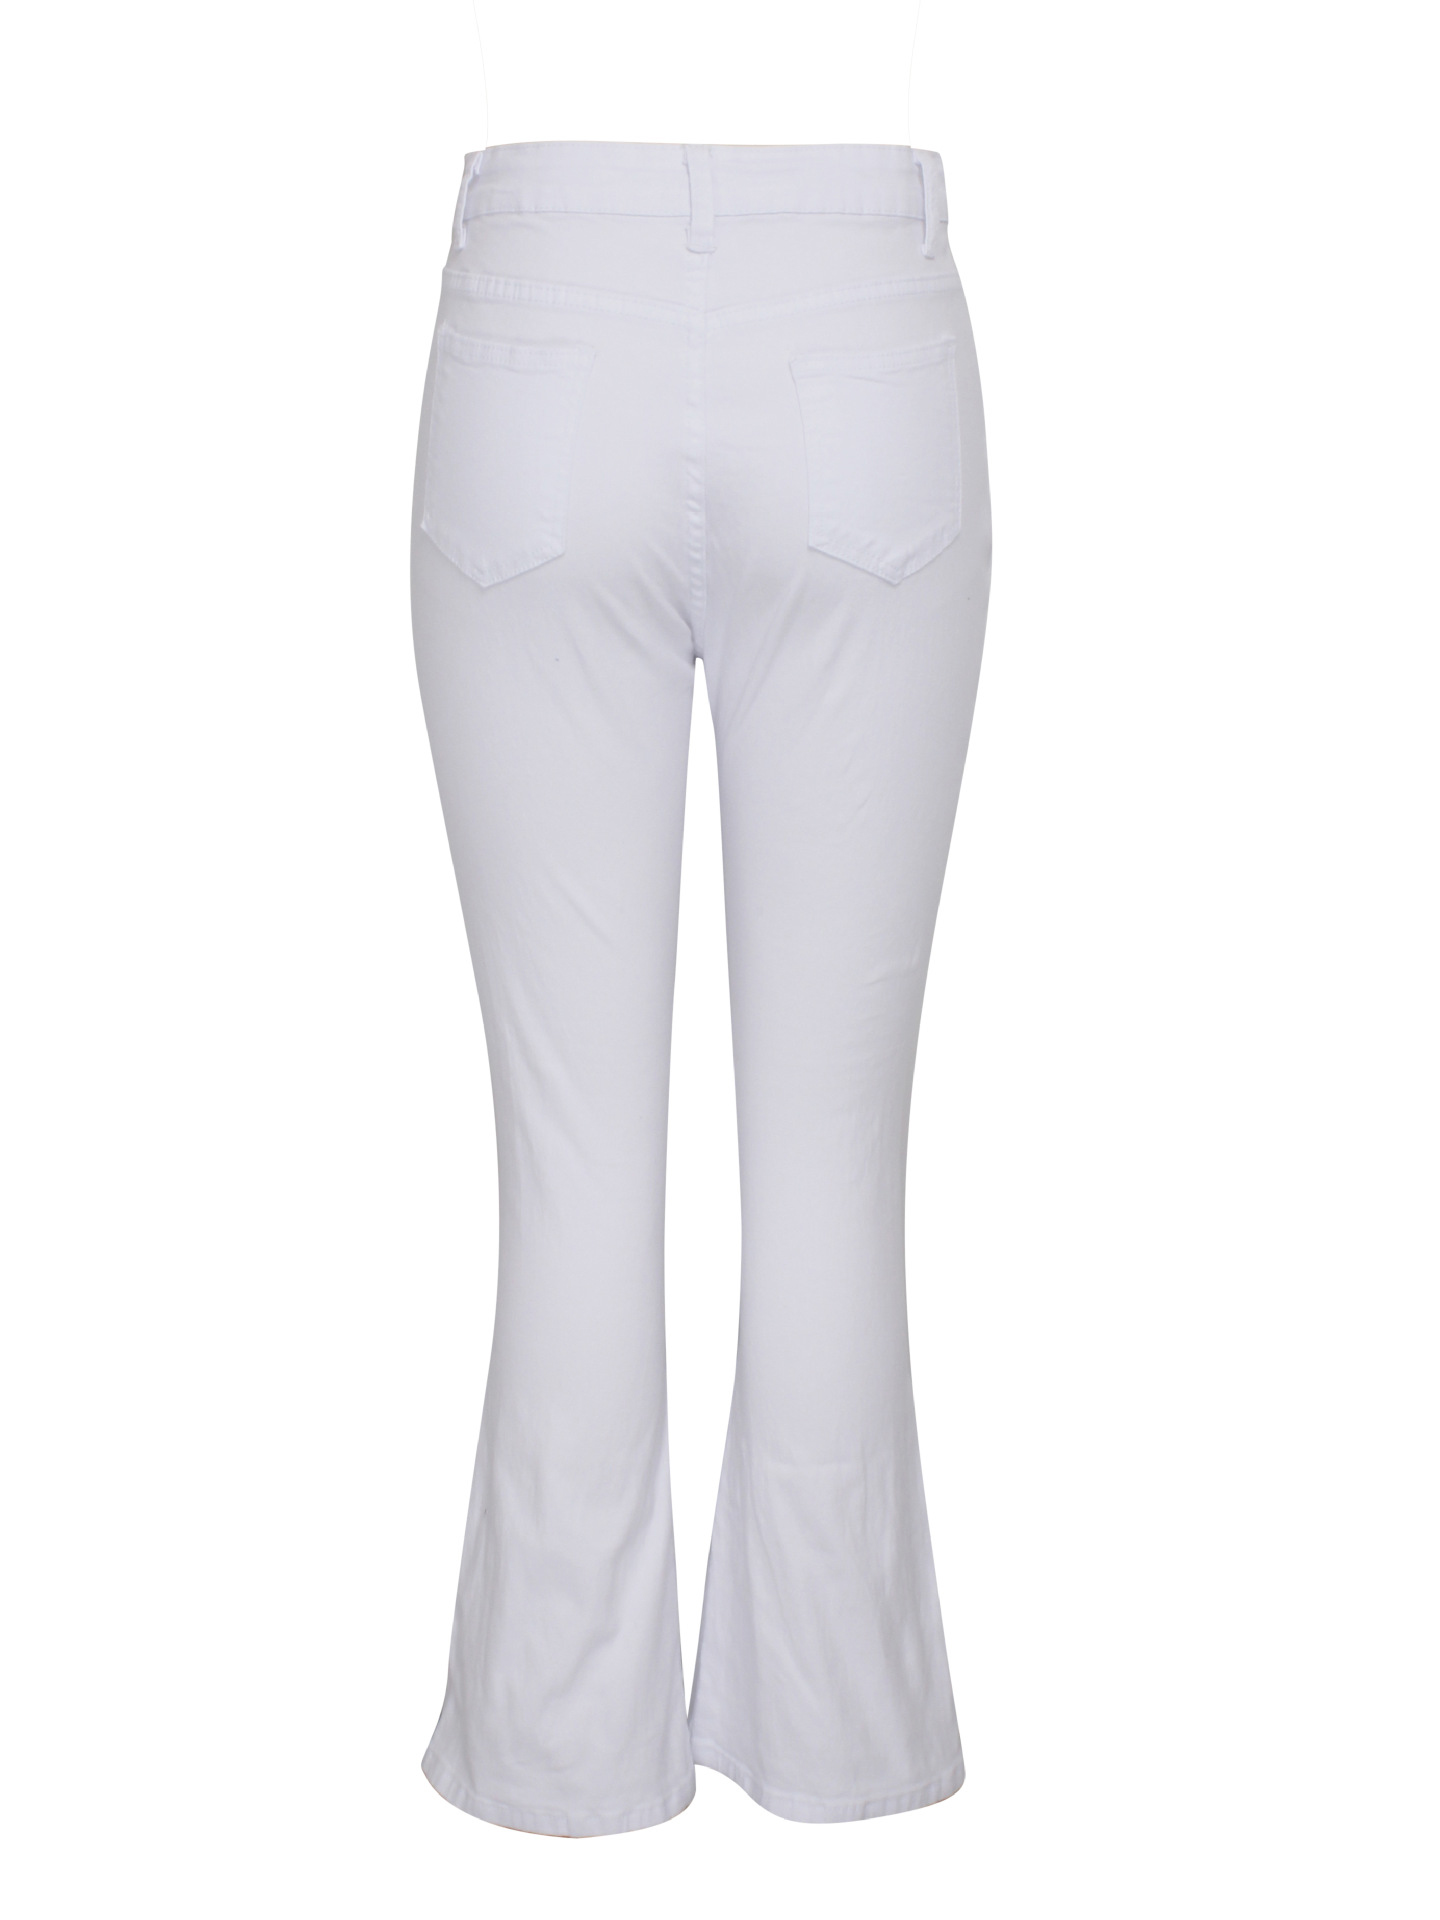 Cheap Price Stylish Button Fly White High Waisted Jeans For Women